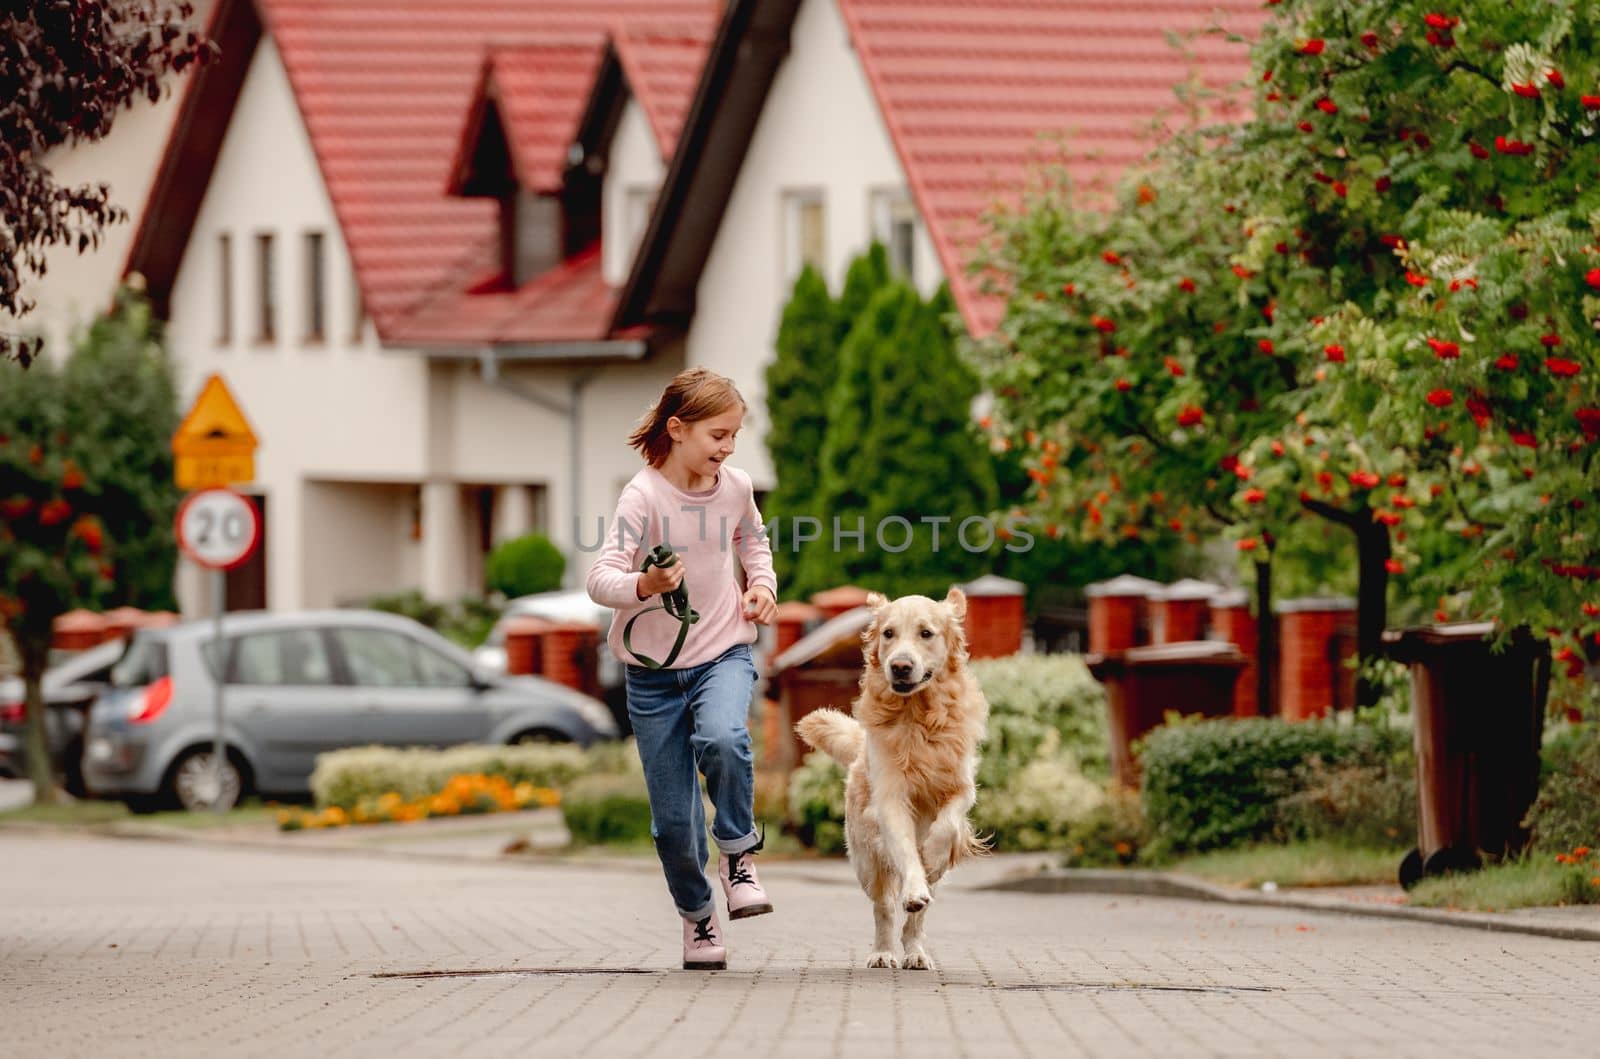 Preteen girl with golden retriever dog running outdoors together. Pretty kid child with purebred pet doggy at street